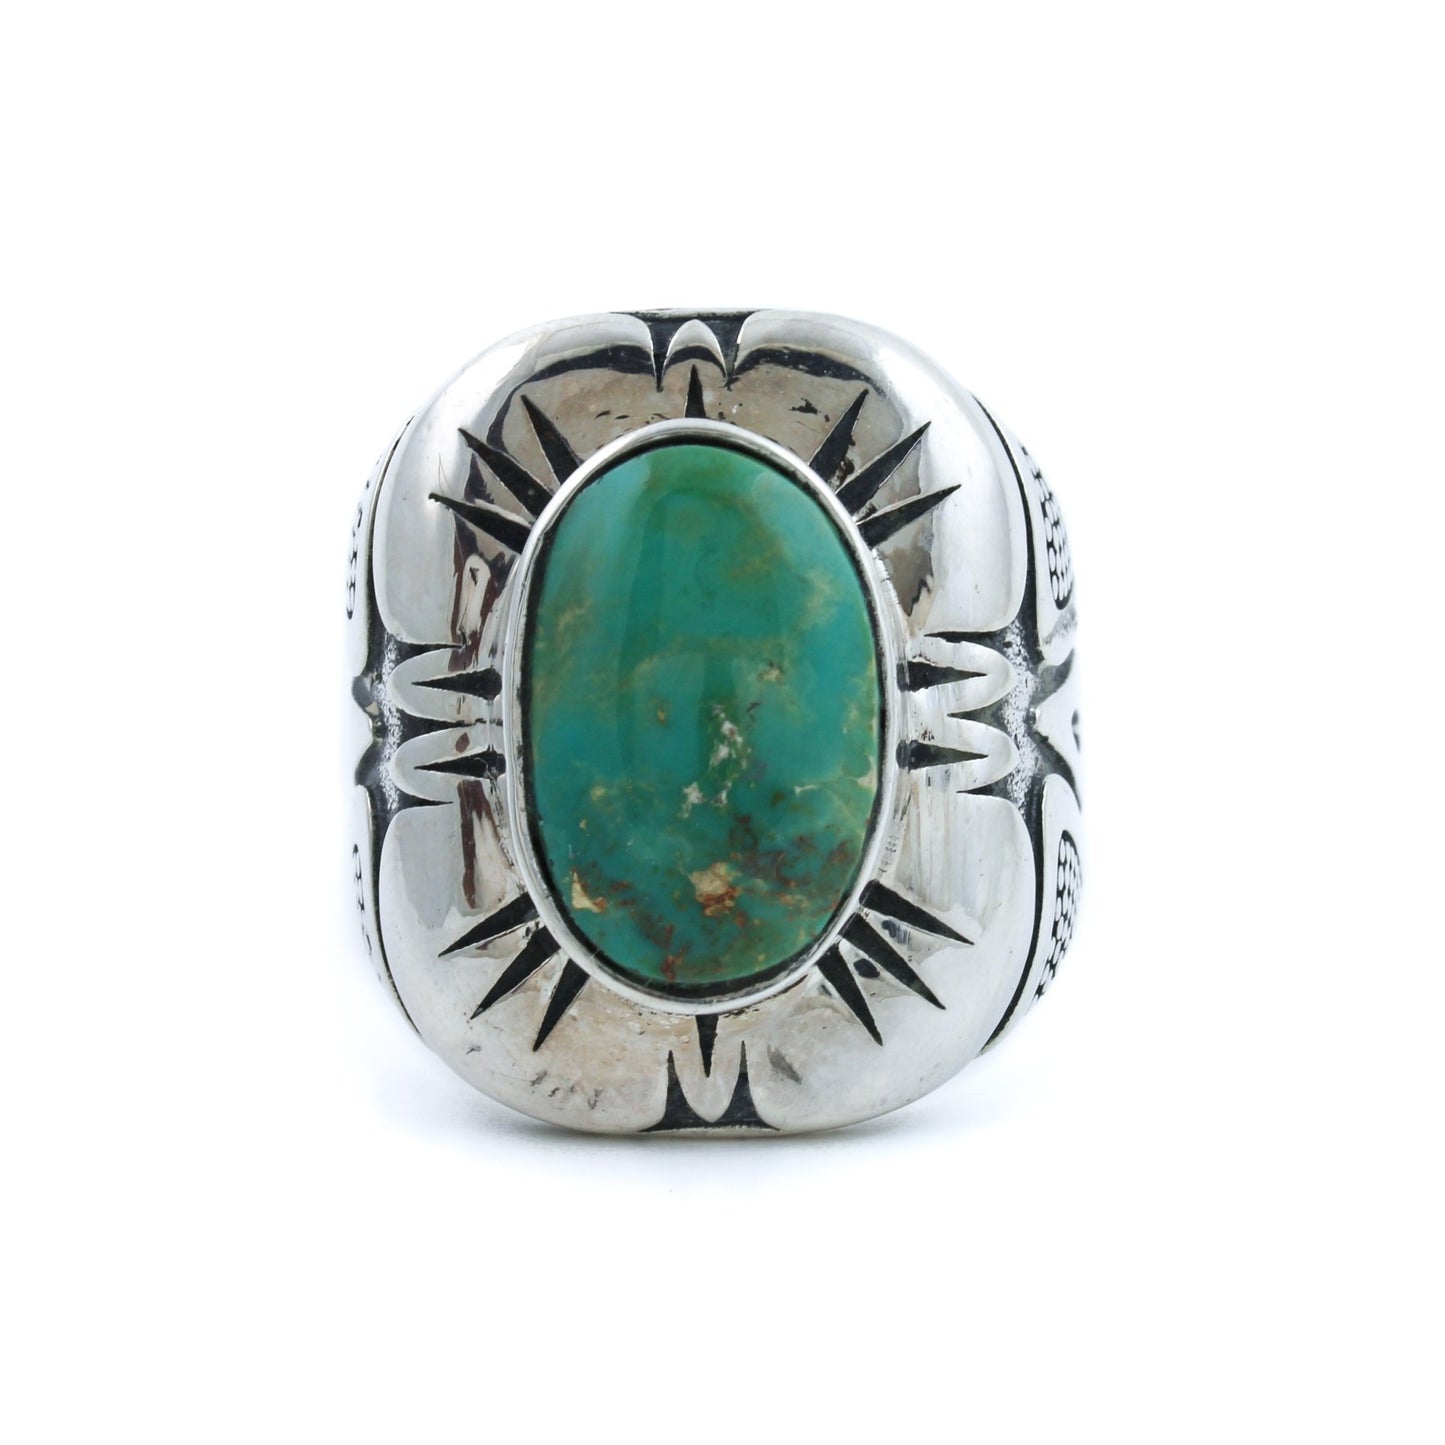 Textured Burst Ring with Royston Turquoise - Kingdom Jewelry